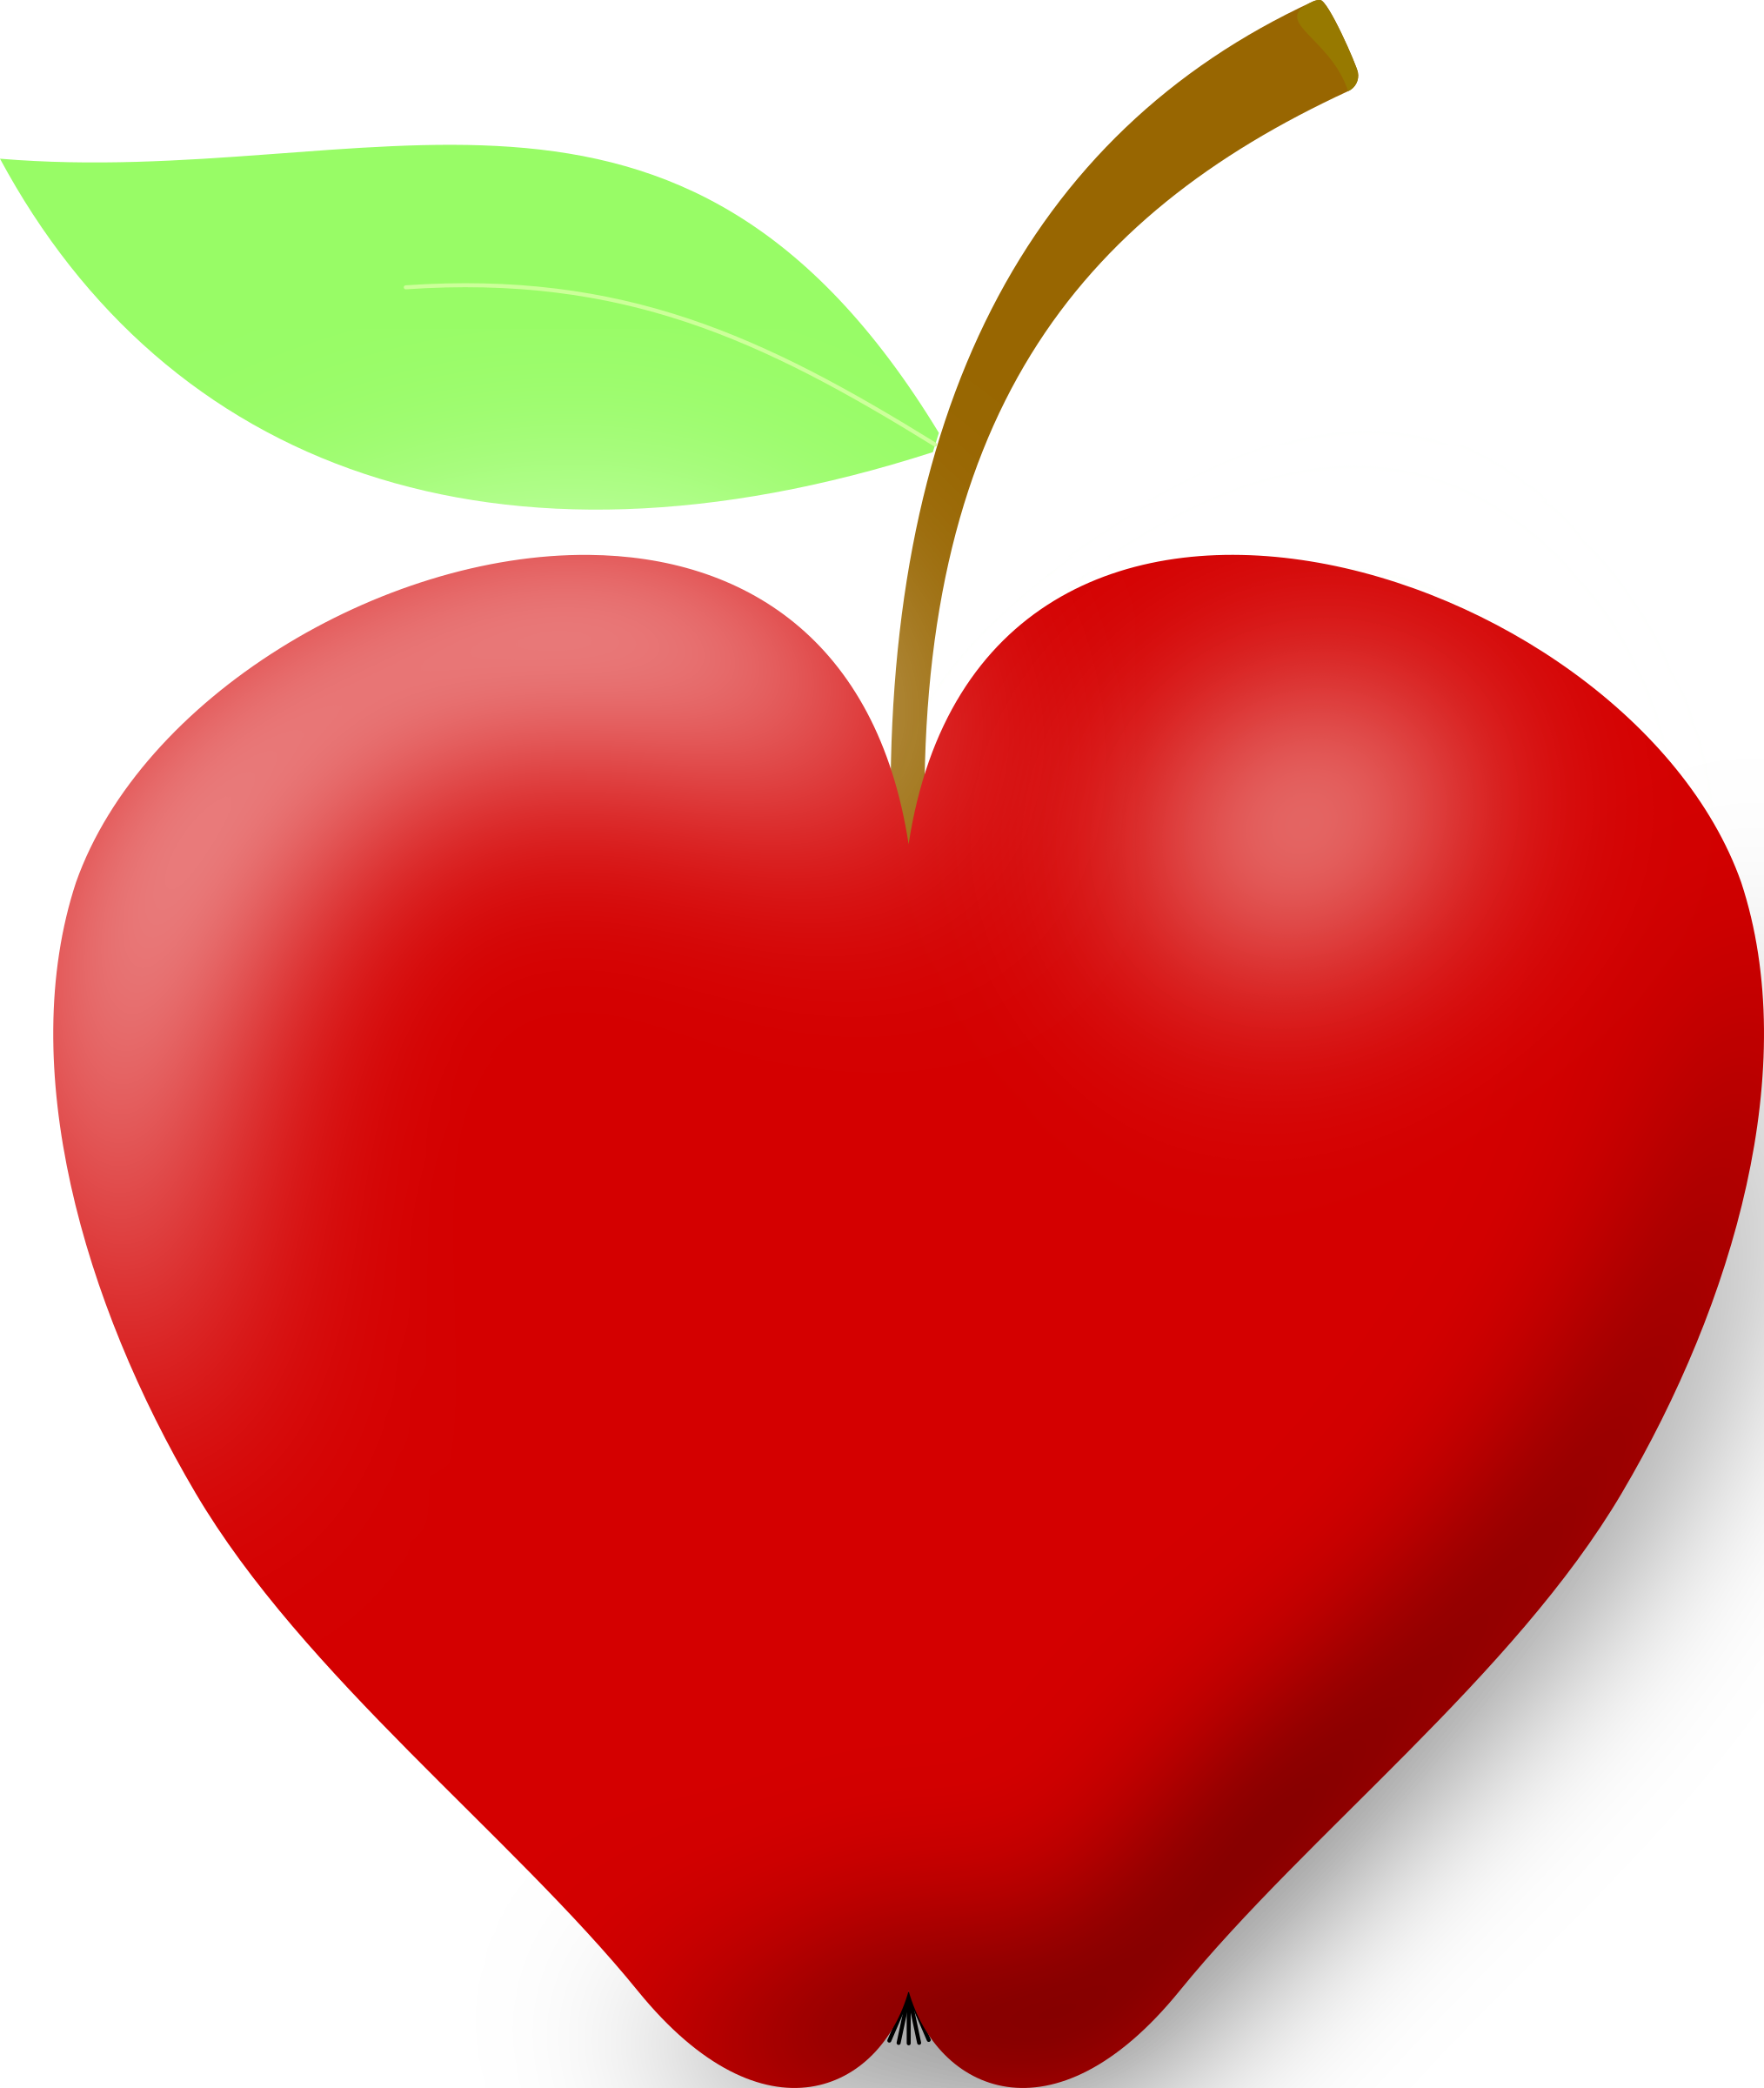 Heart Clipart Apple Pencil And In Color - Health Fitness And Beauty (2028x2400)